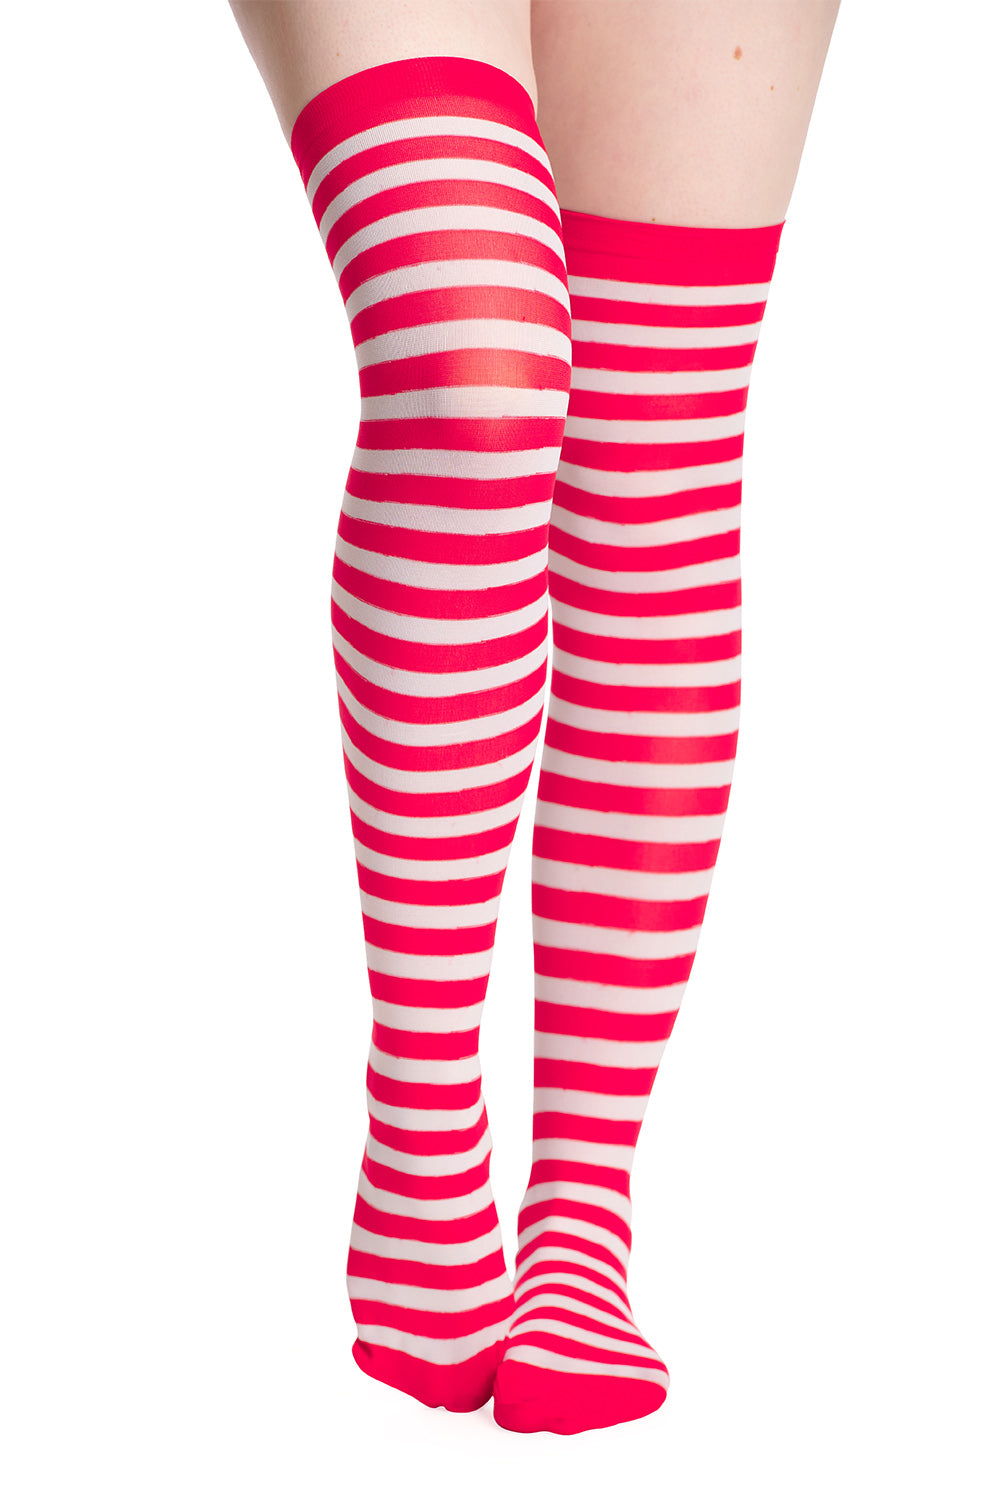 Model wearing red and white thigh high striped socks 